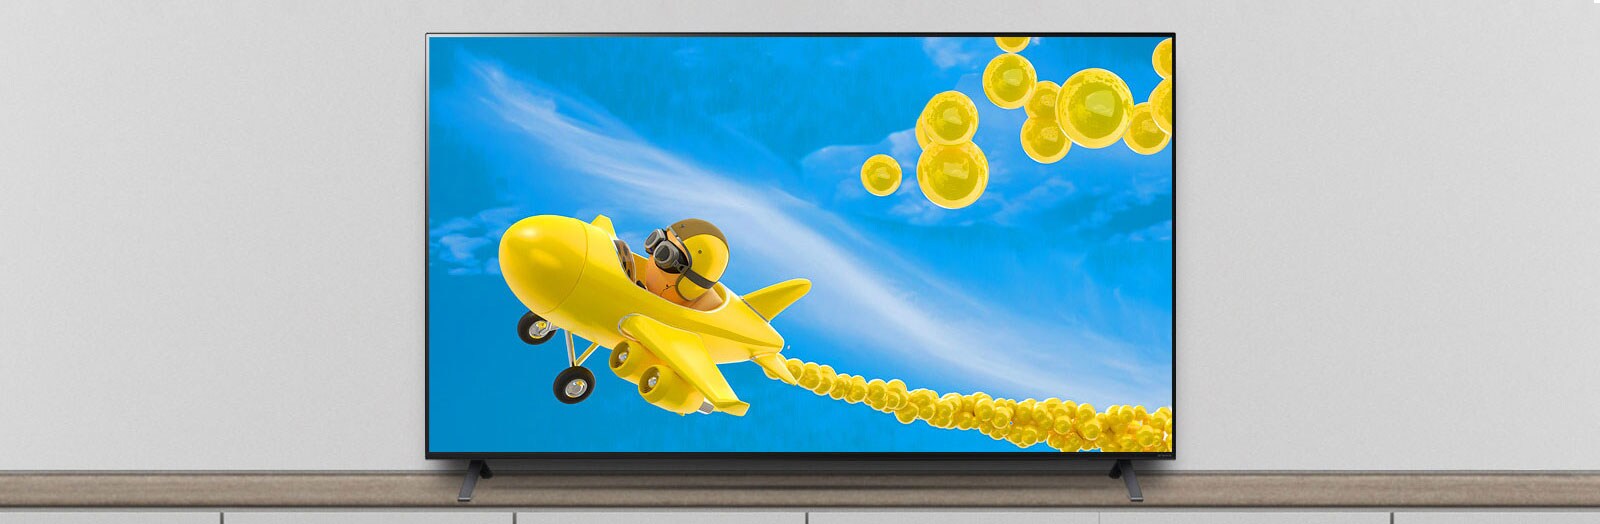 The TV is on the stand, and the screen shows an animation of an airplane flying through it.